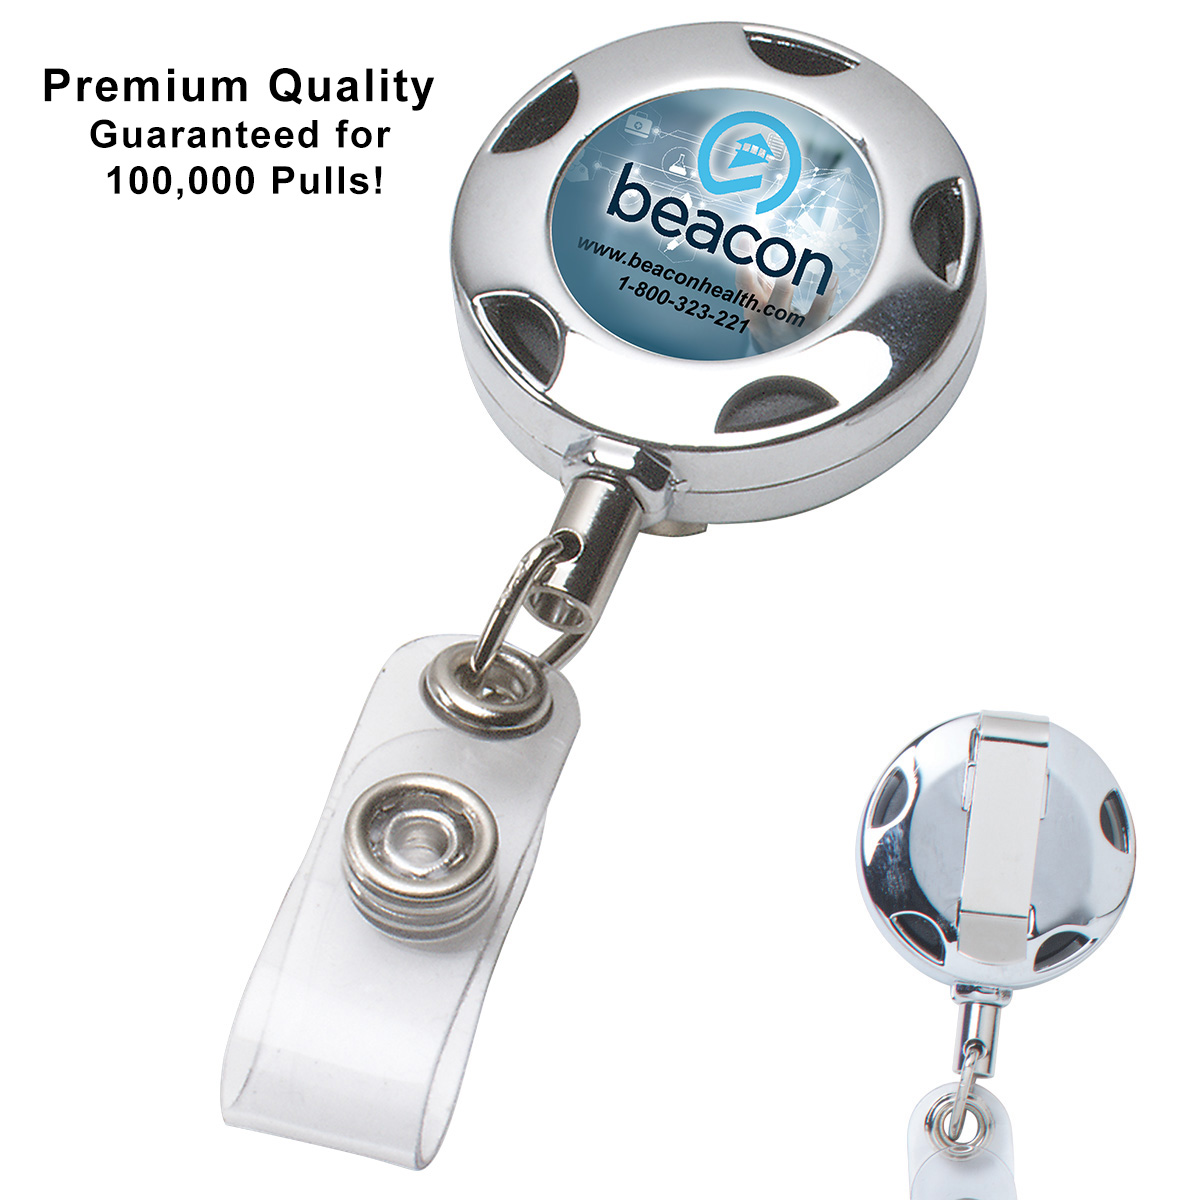 TIFFIN 32 Cord Round Chrome Solid Metal Sport Retractable Badge